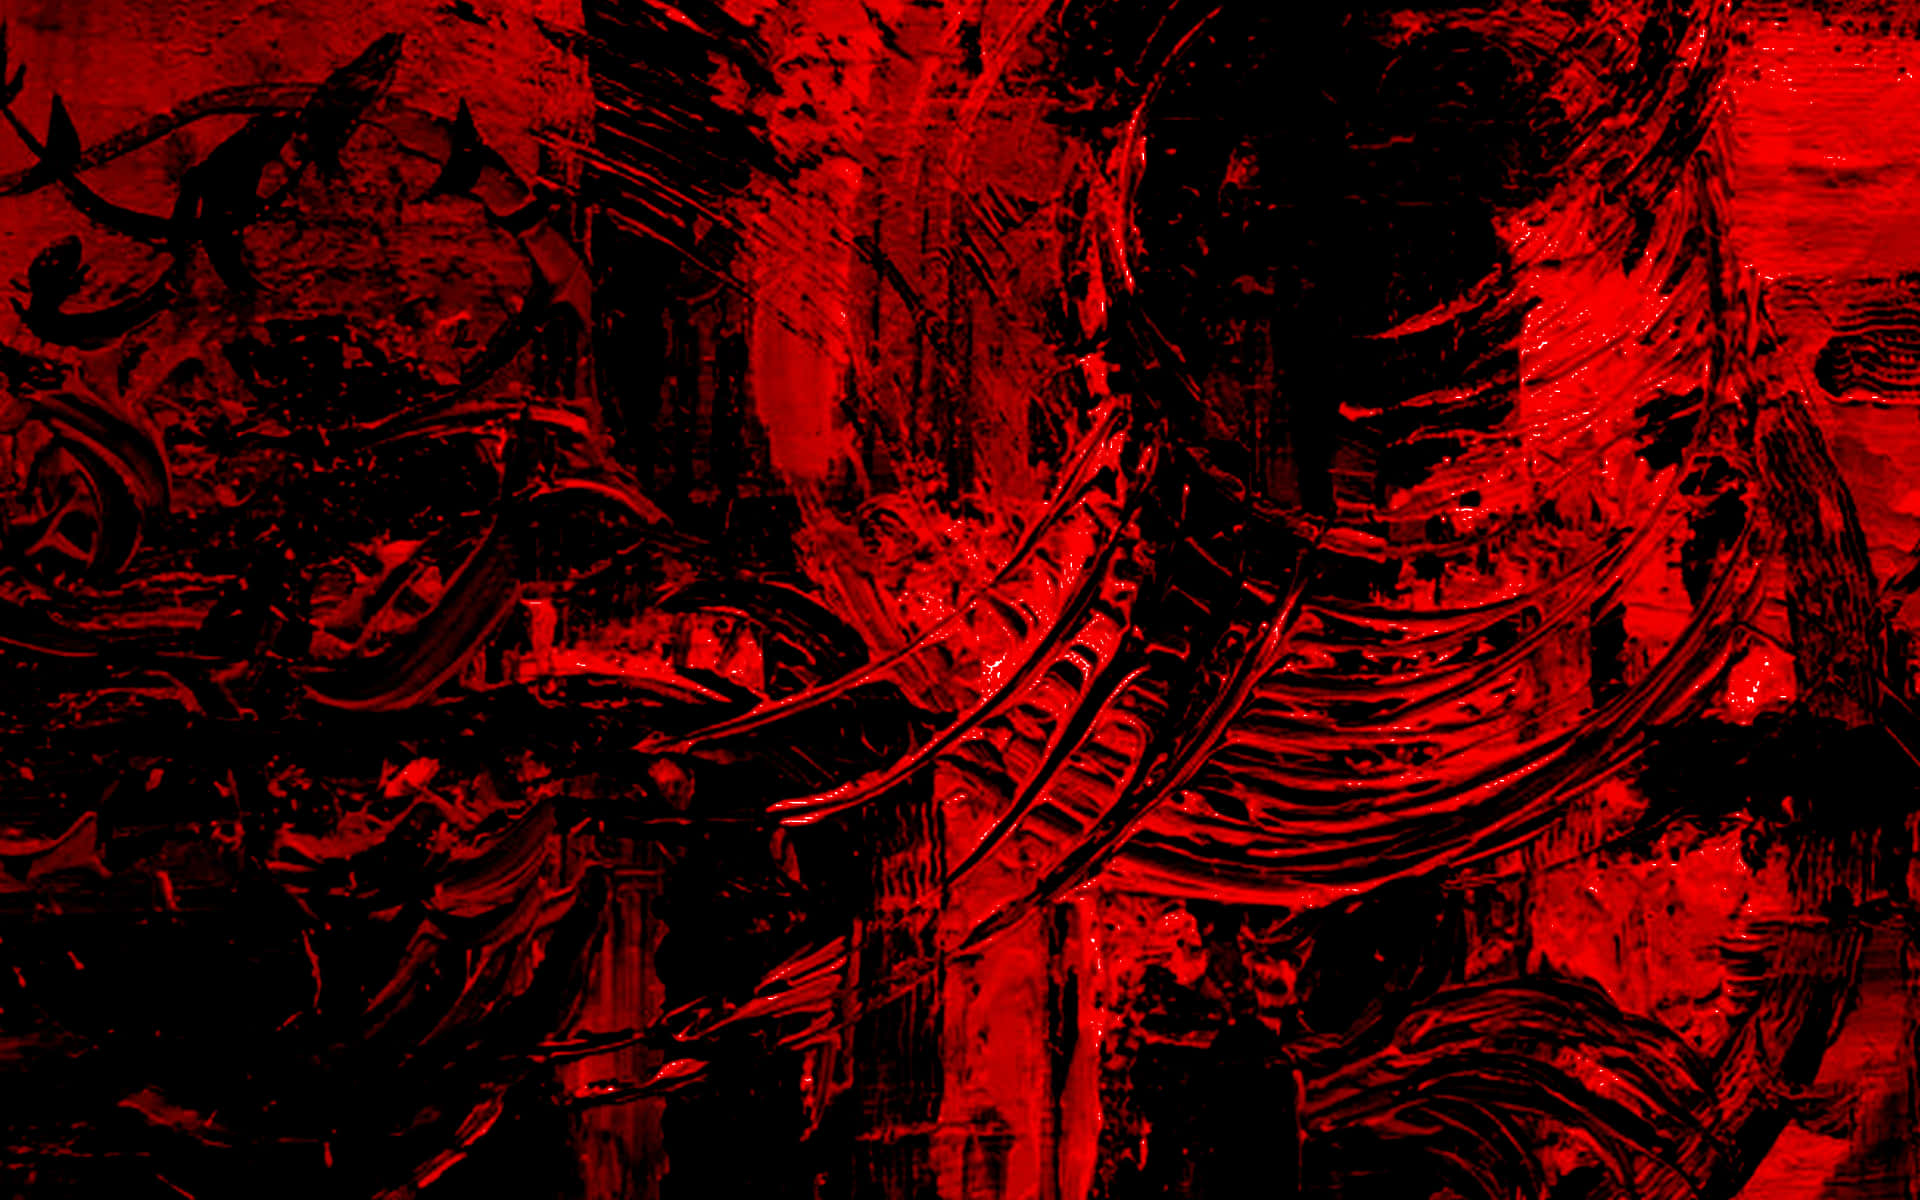 Abstract dark red background illustration, free image by rawpixel.com /  Aum